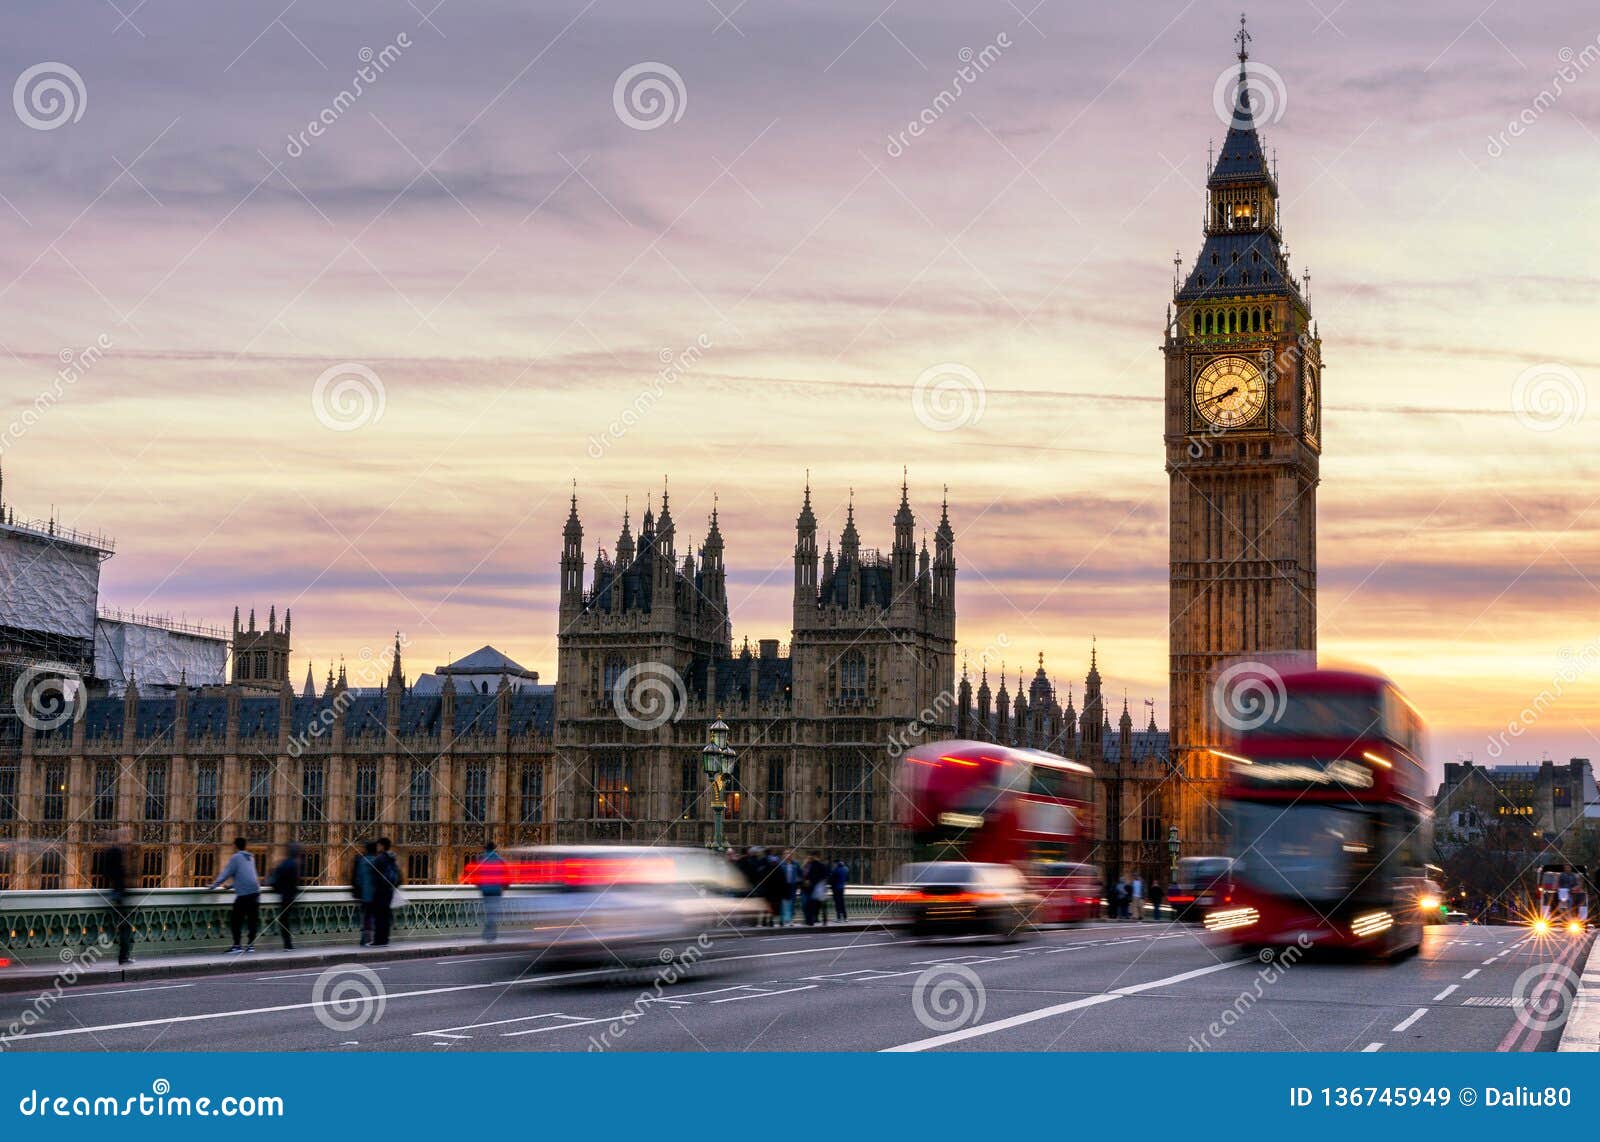 London, the UK. Red Bus in Motion and Big Ben, the Palace of ...